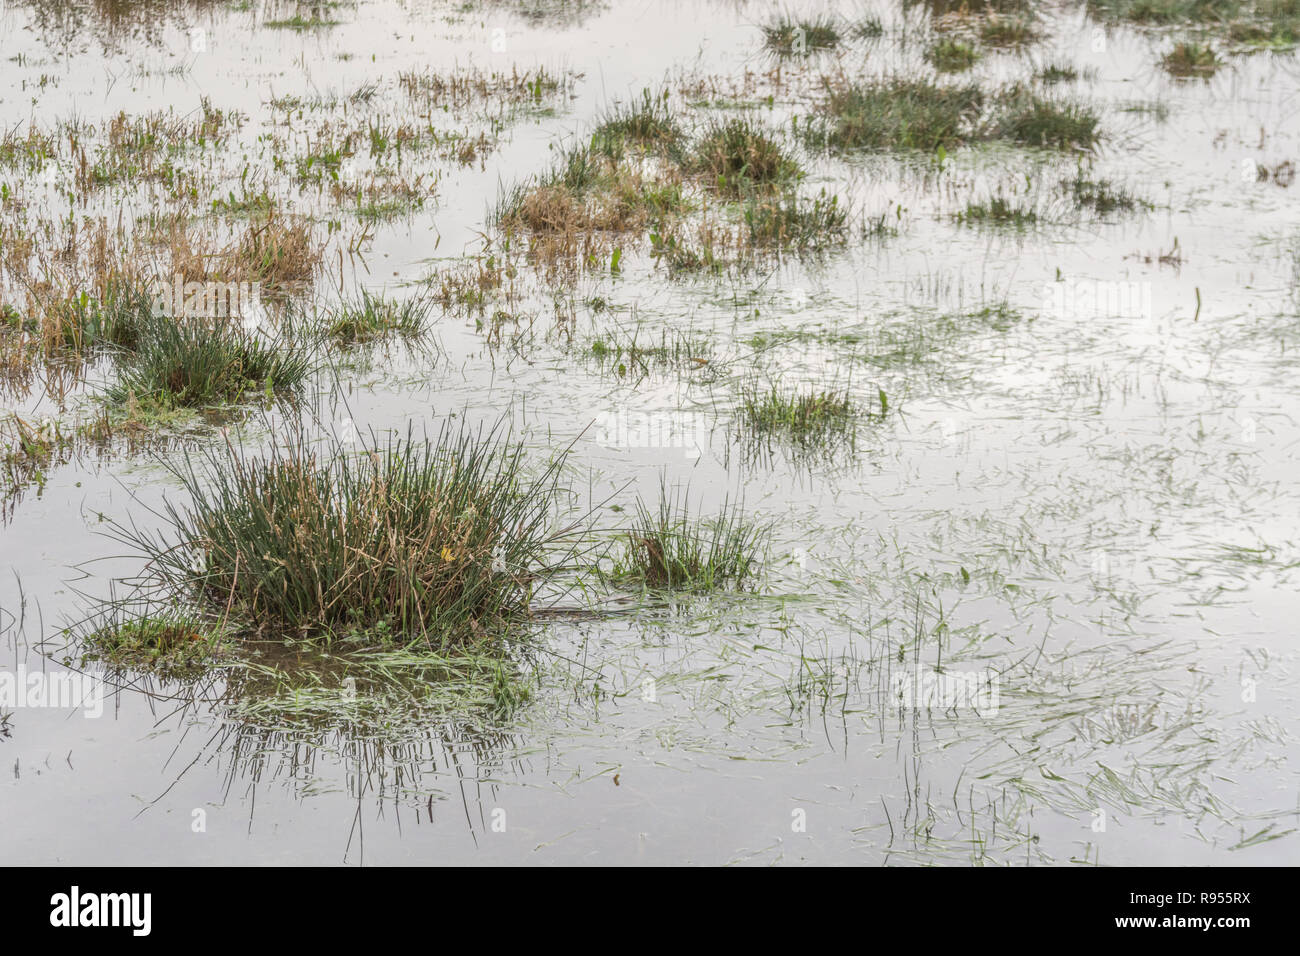 Inundated marshy field with Juncus Rush / Juncus effusus tufts sticking out of the flood water. Trump 'Drain the Swamp' metaphor perhaps, under water. Stock Photo